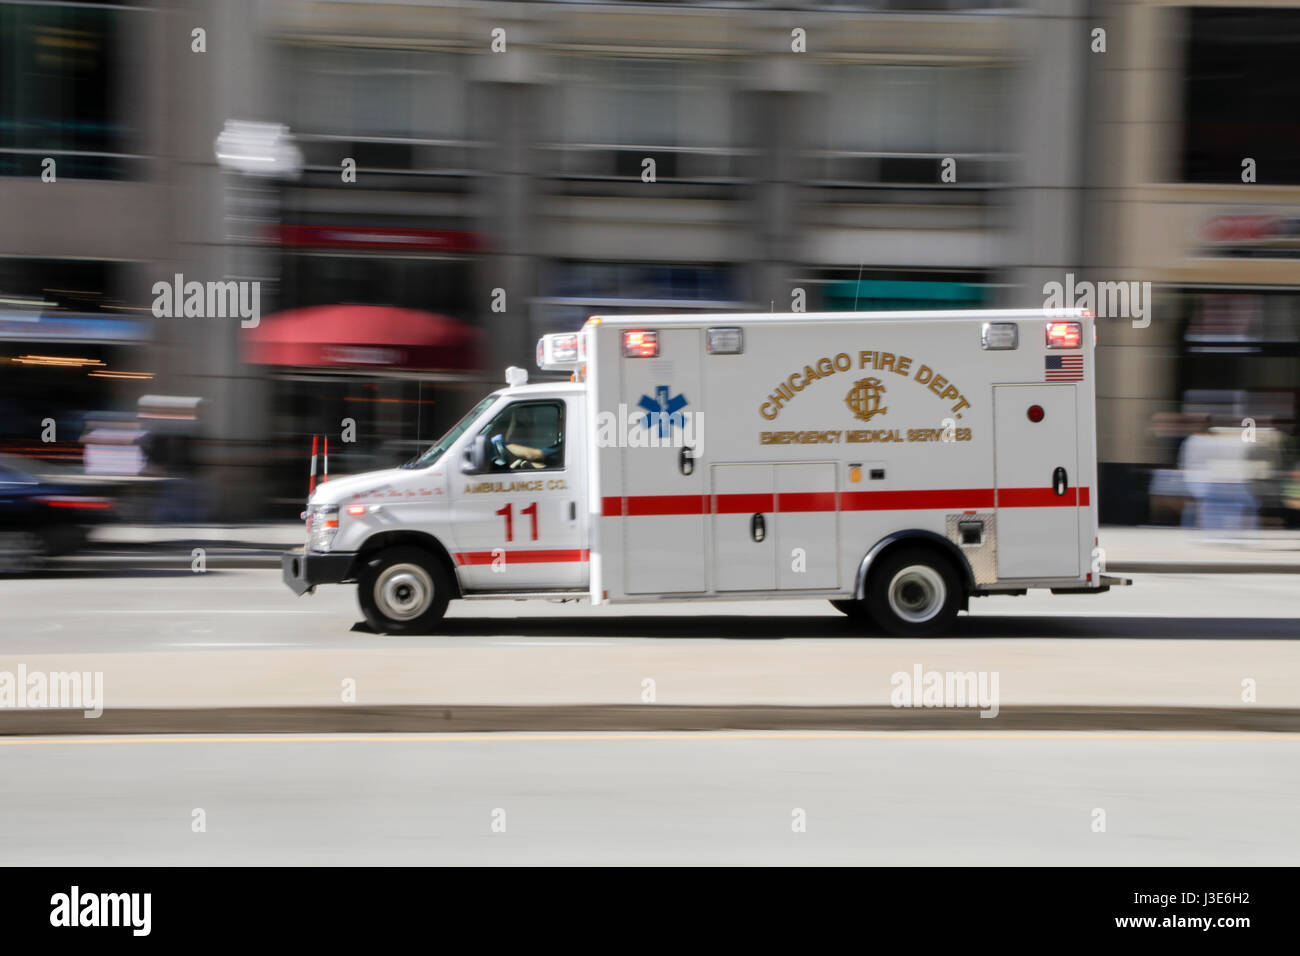 Chicago Fire Department ambulance on emergency call. Blured. Stock Photo